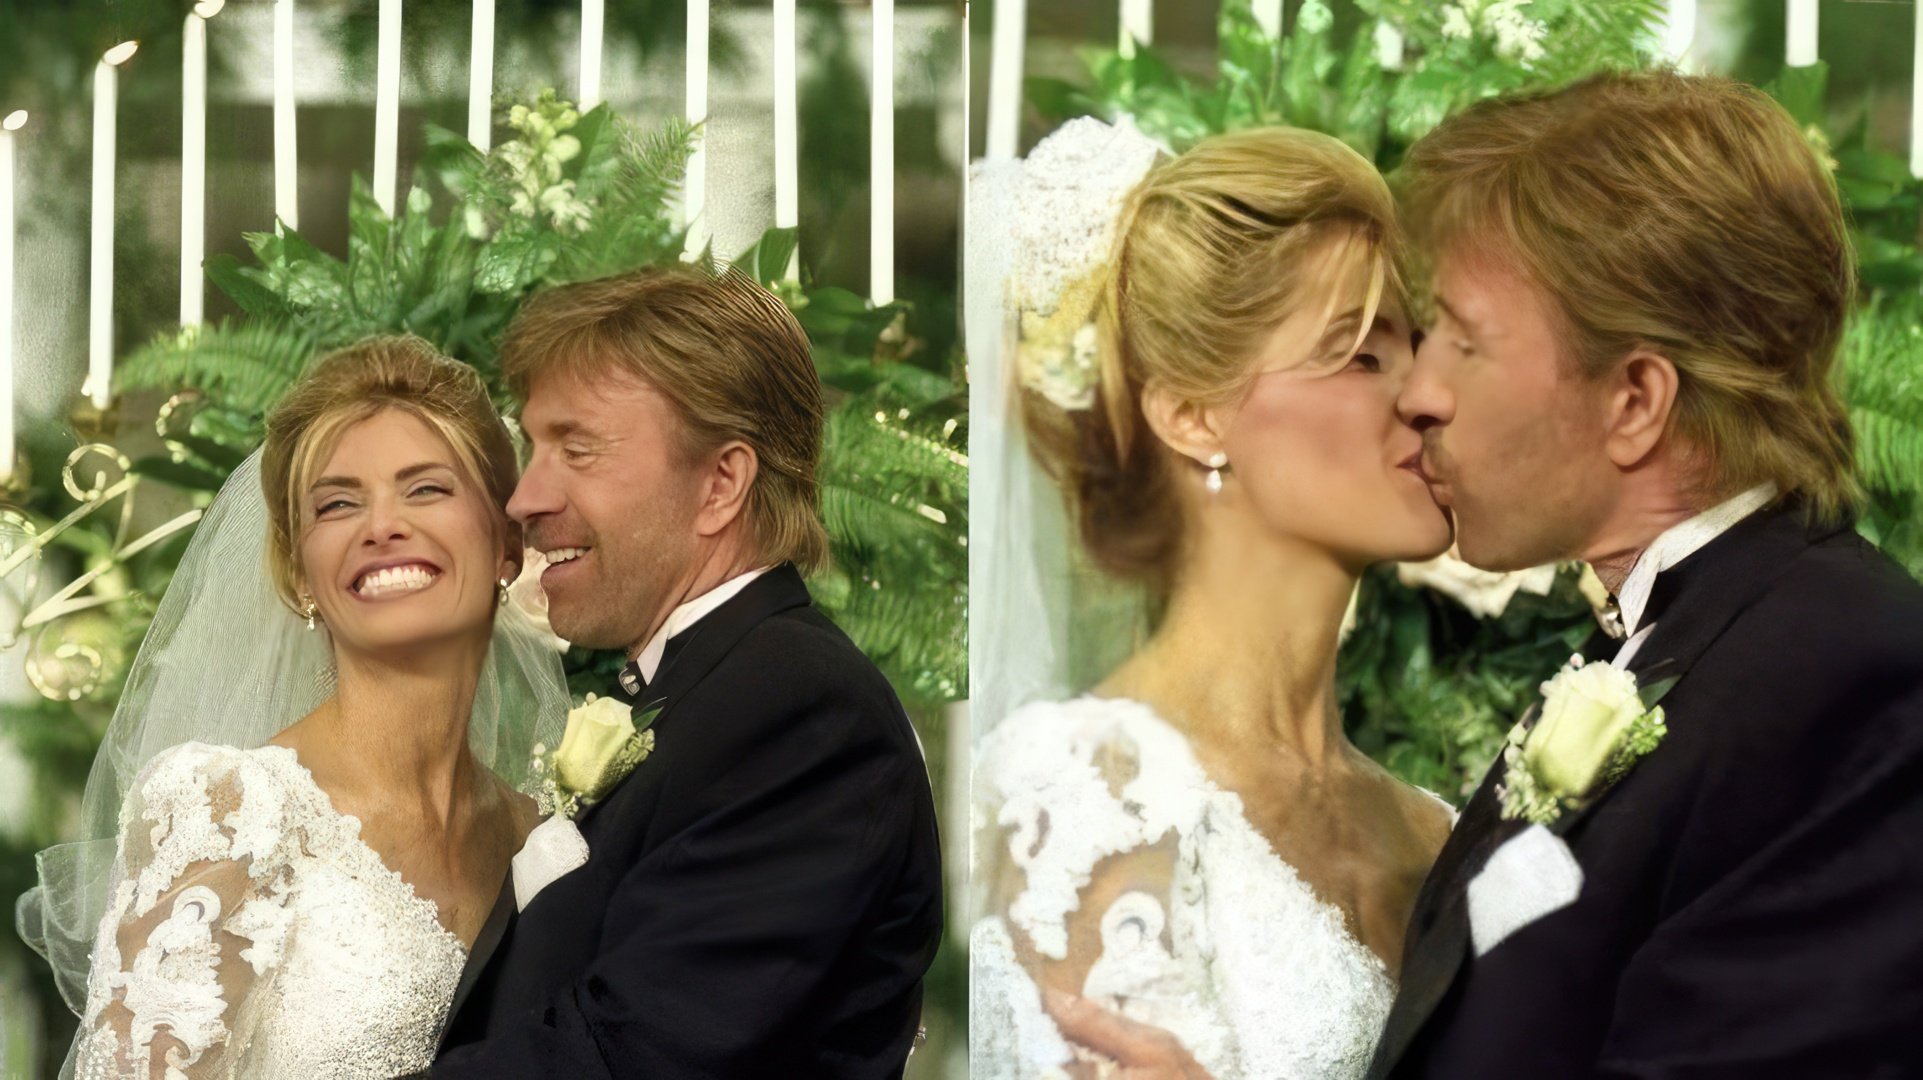 The wedding of Chuck Norris and Gine O'Kelley